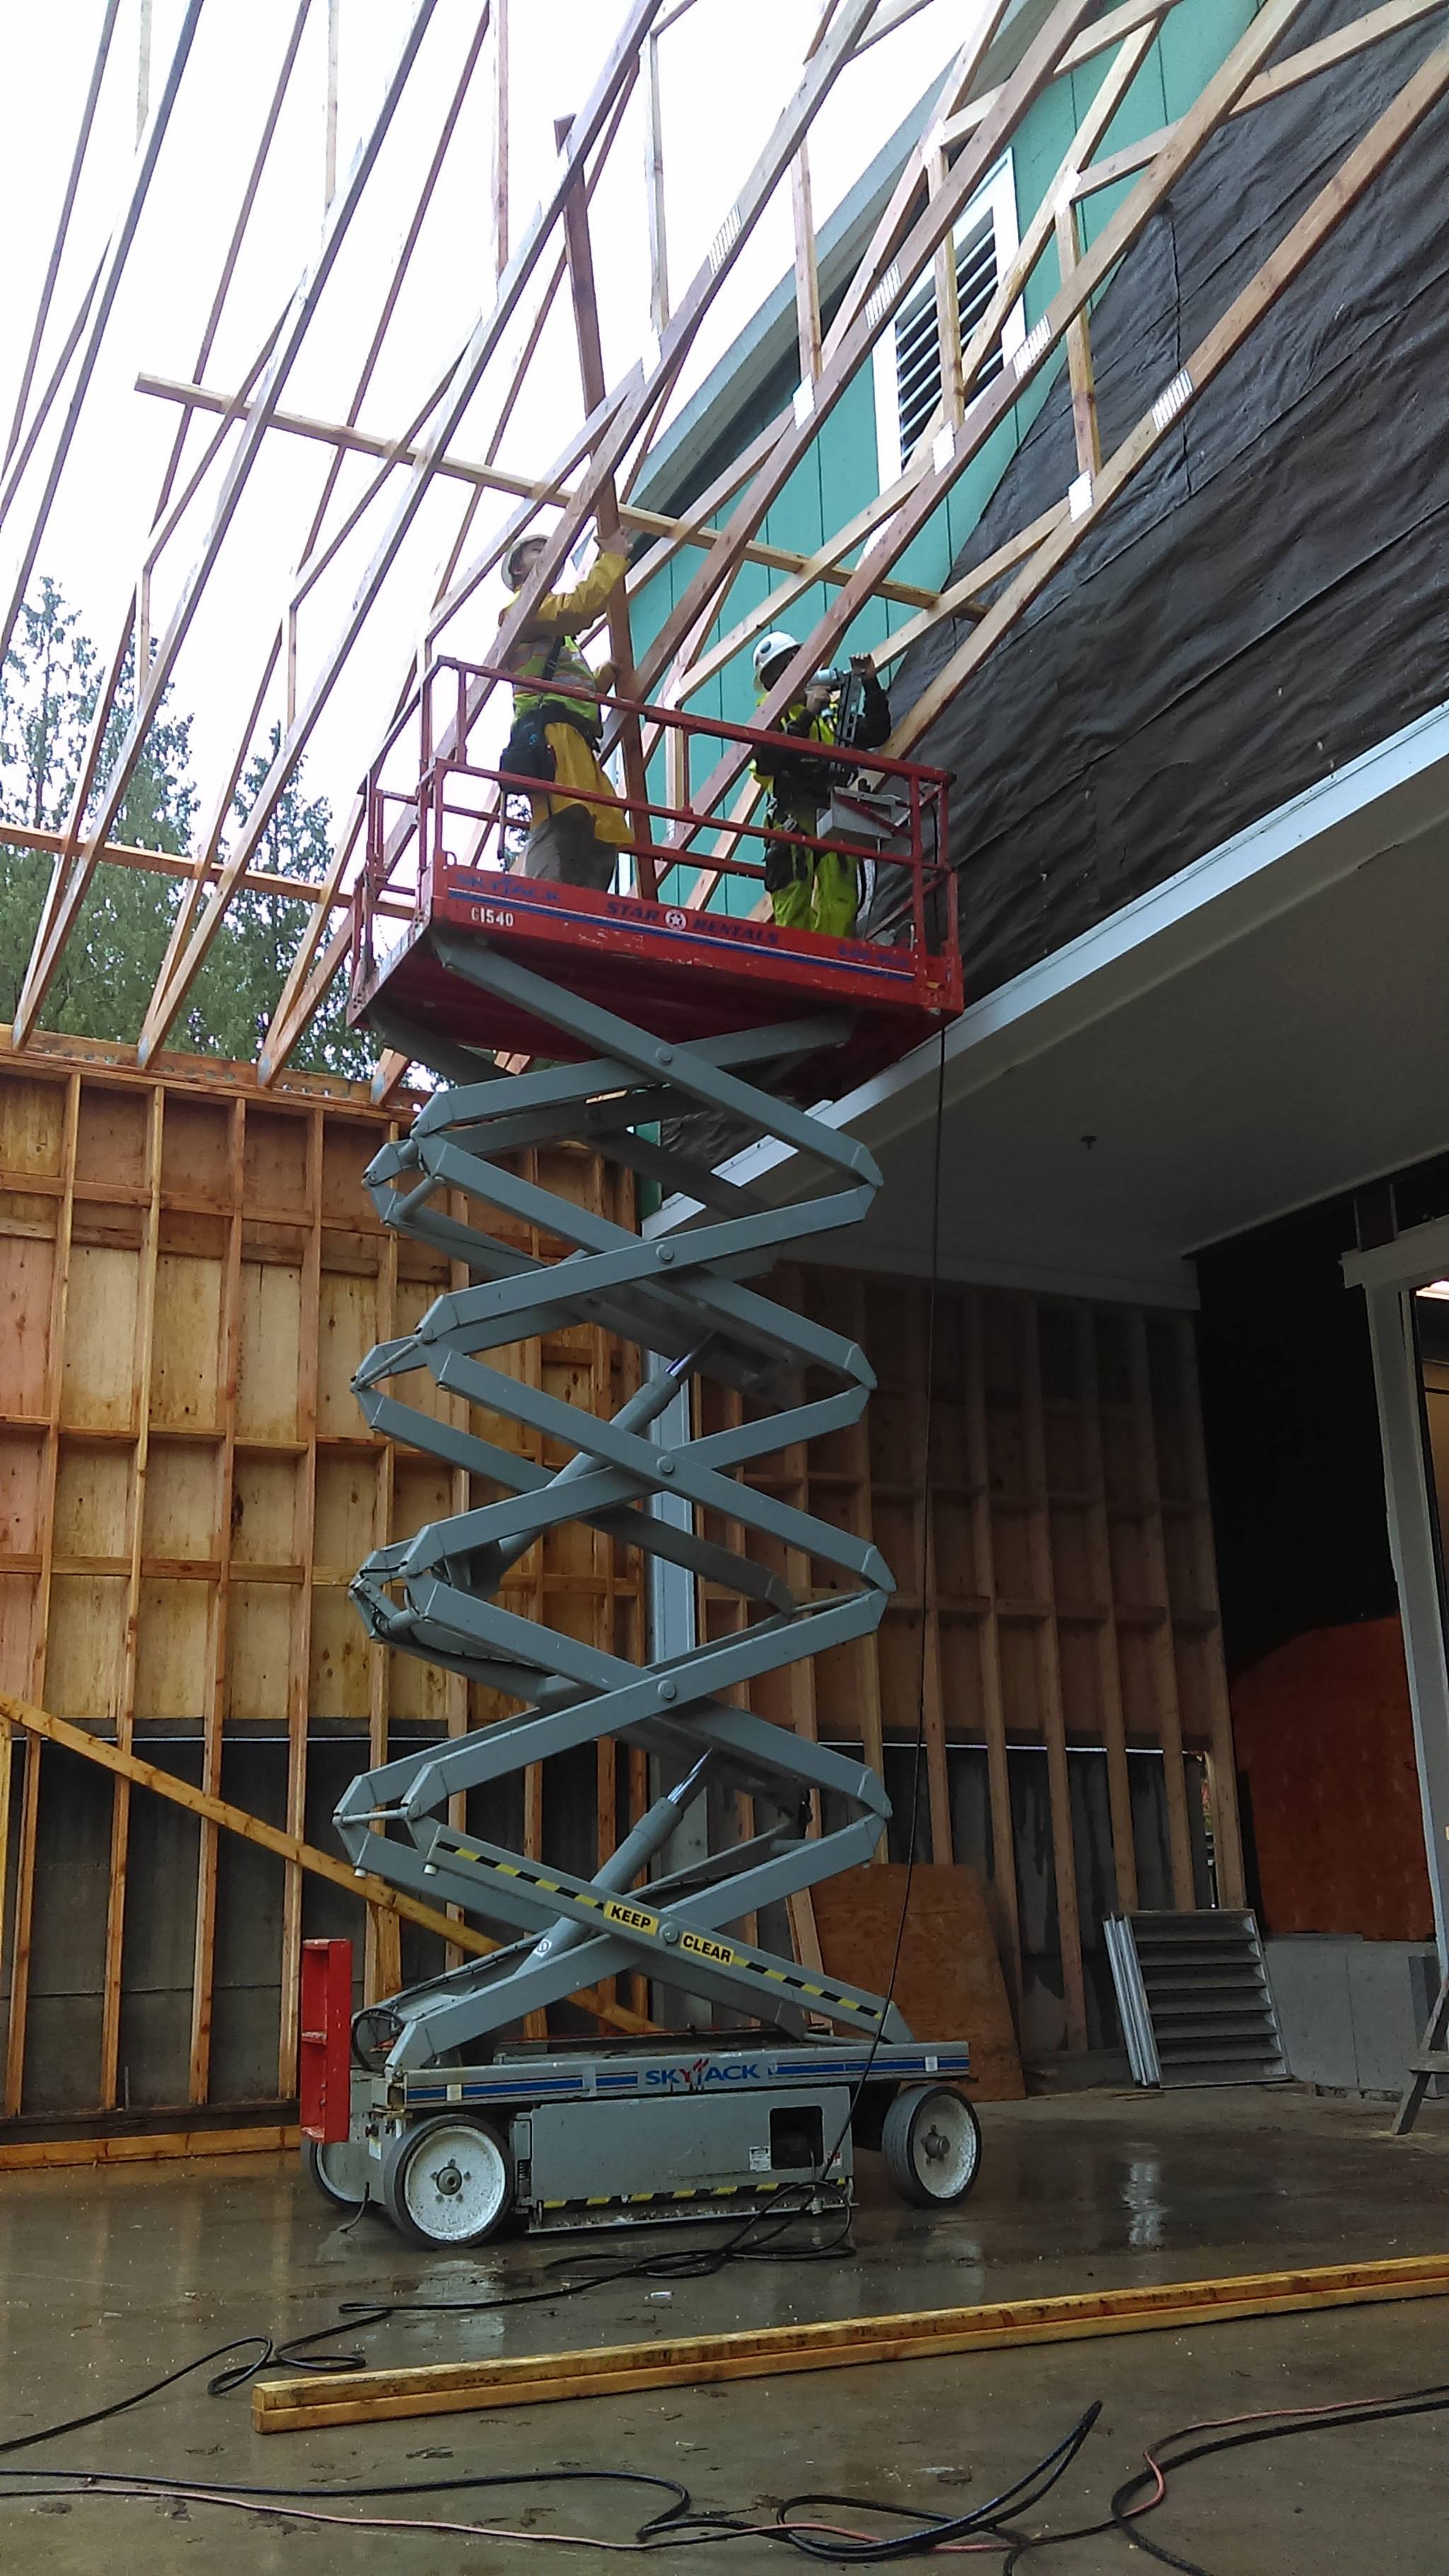 Luciano Marano | Kitsap News Group                                Construction is underway at Bainbridge Island Fire Station 23 to expand the rear apparatus bay as part of the overall building upgrade being done as it is now staffed 24/7. A celebratory open house will be held from 1 to 3 p.m. Saturday, Nov. 5.